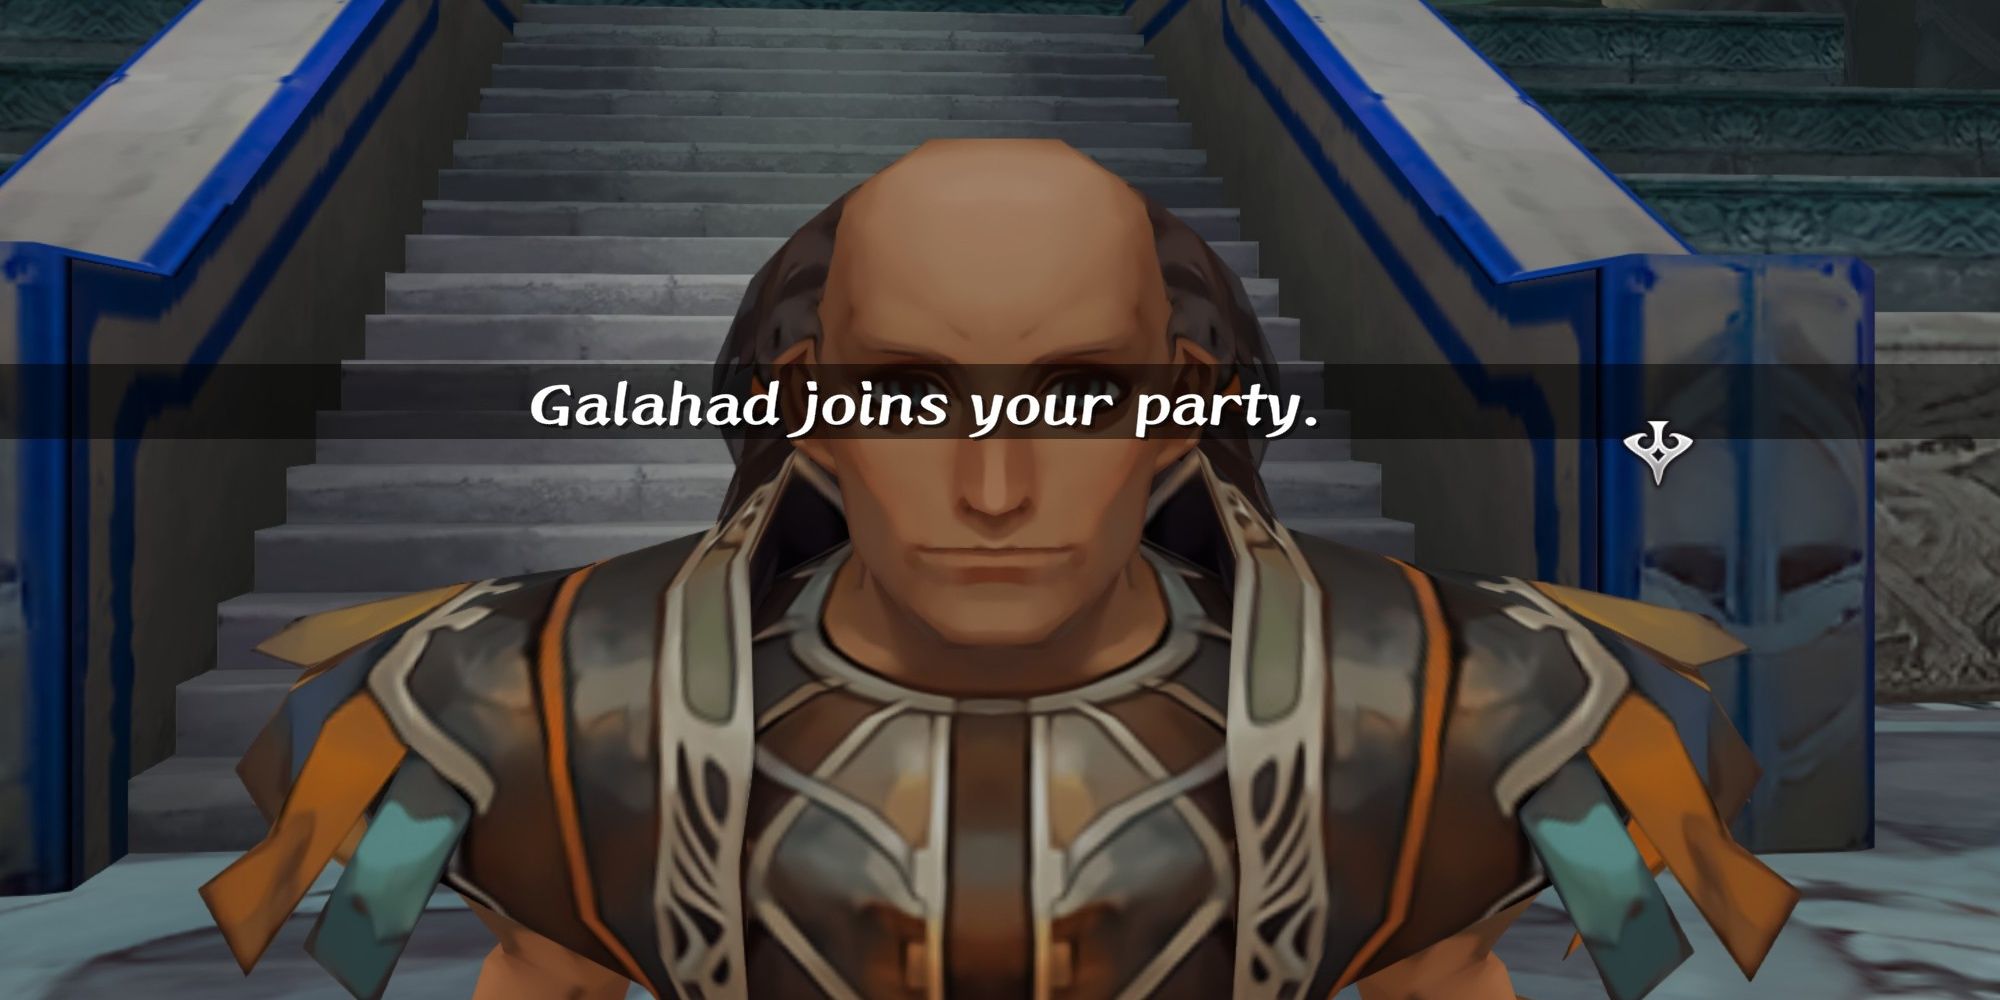 Confirmation of Galahad joining a party